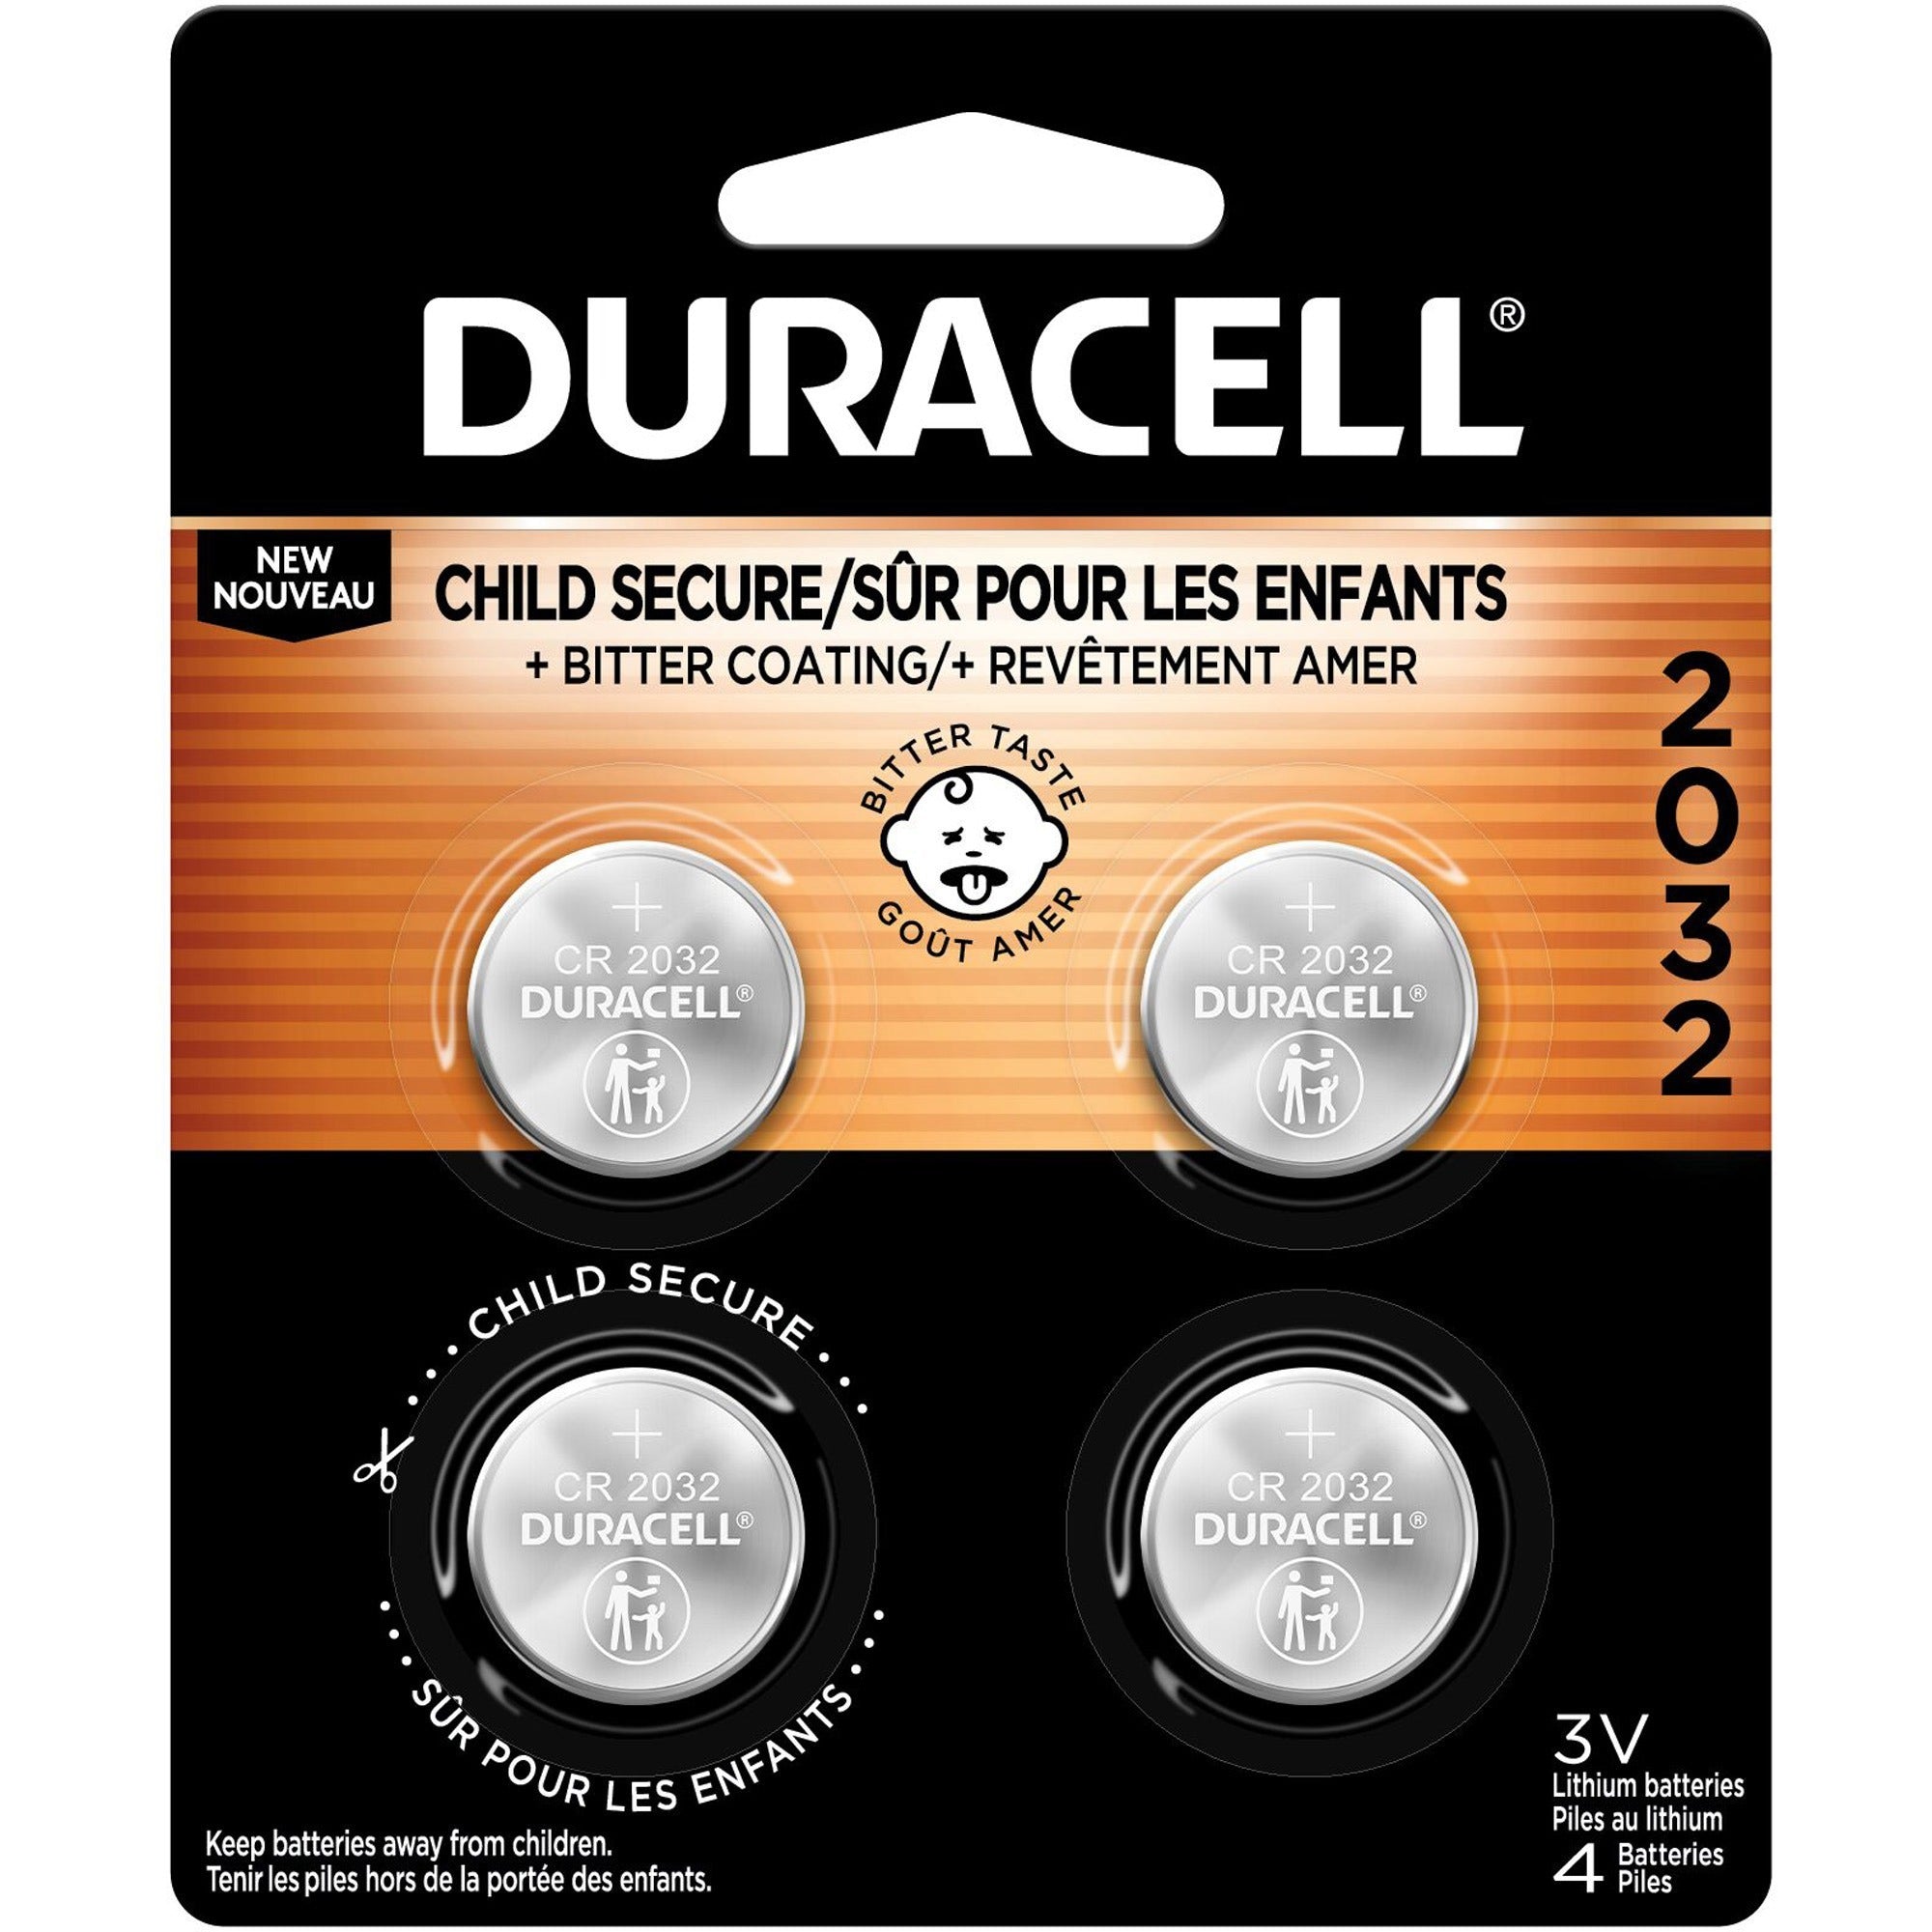 duracell-2032-3v-lithium-battery-4-packs-for-security-device-medical-equipment-health-fitness-monitoring-equipment-calculator-watch-keyfob-transmitter-cr2032-3-v-dc-30-carton_durdl2032b4ct - 1